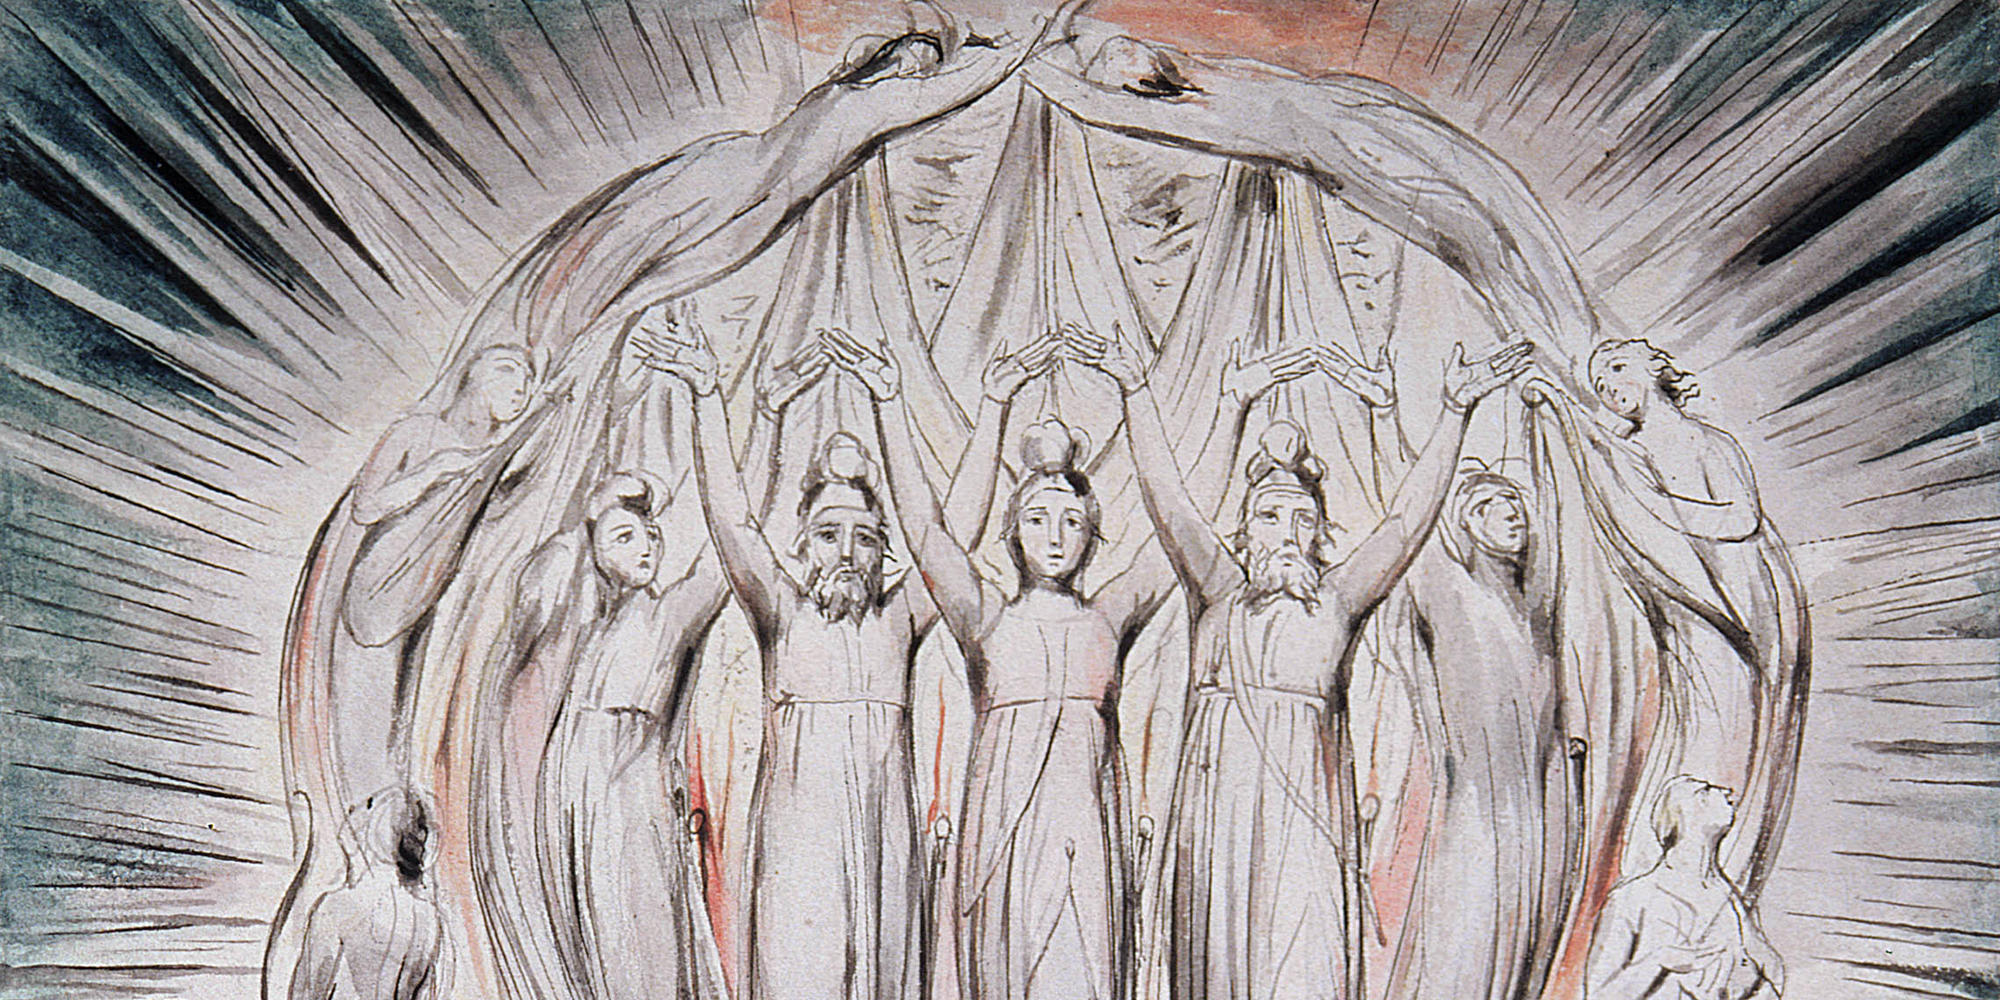 Angels in the poetry of William Blake